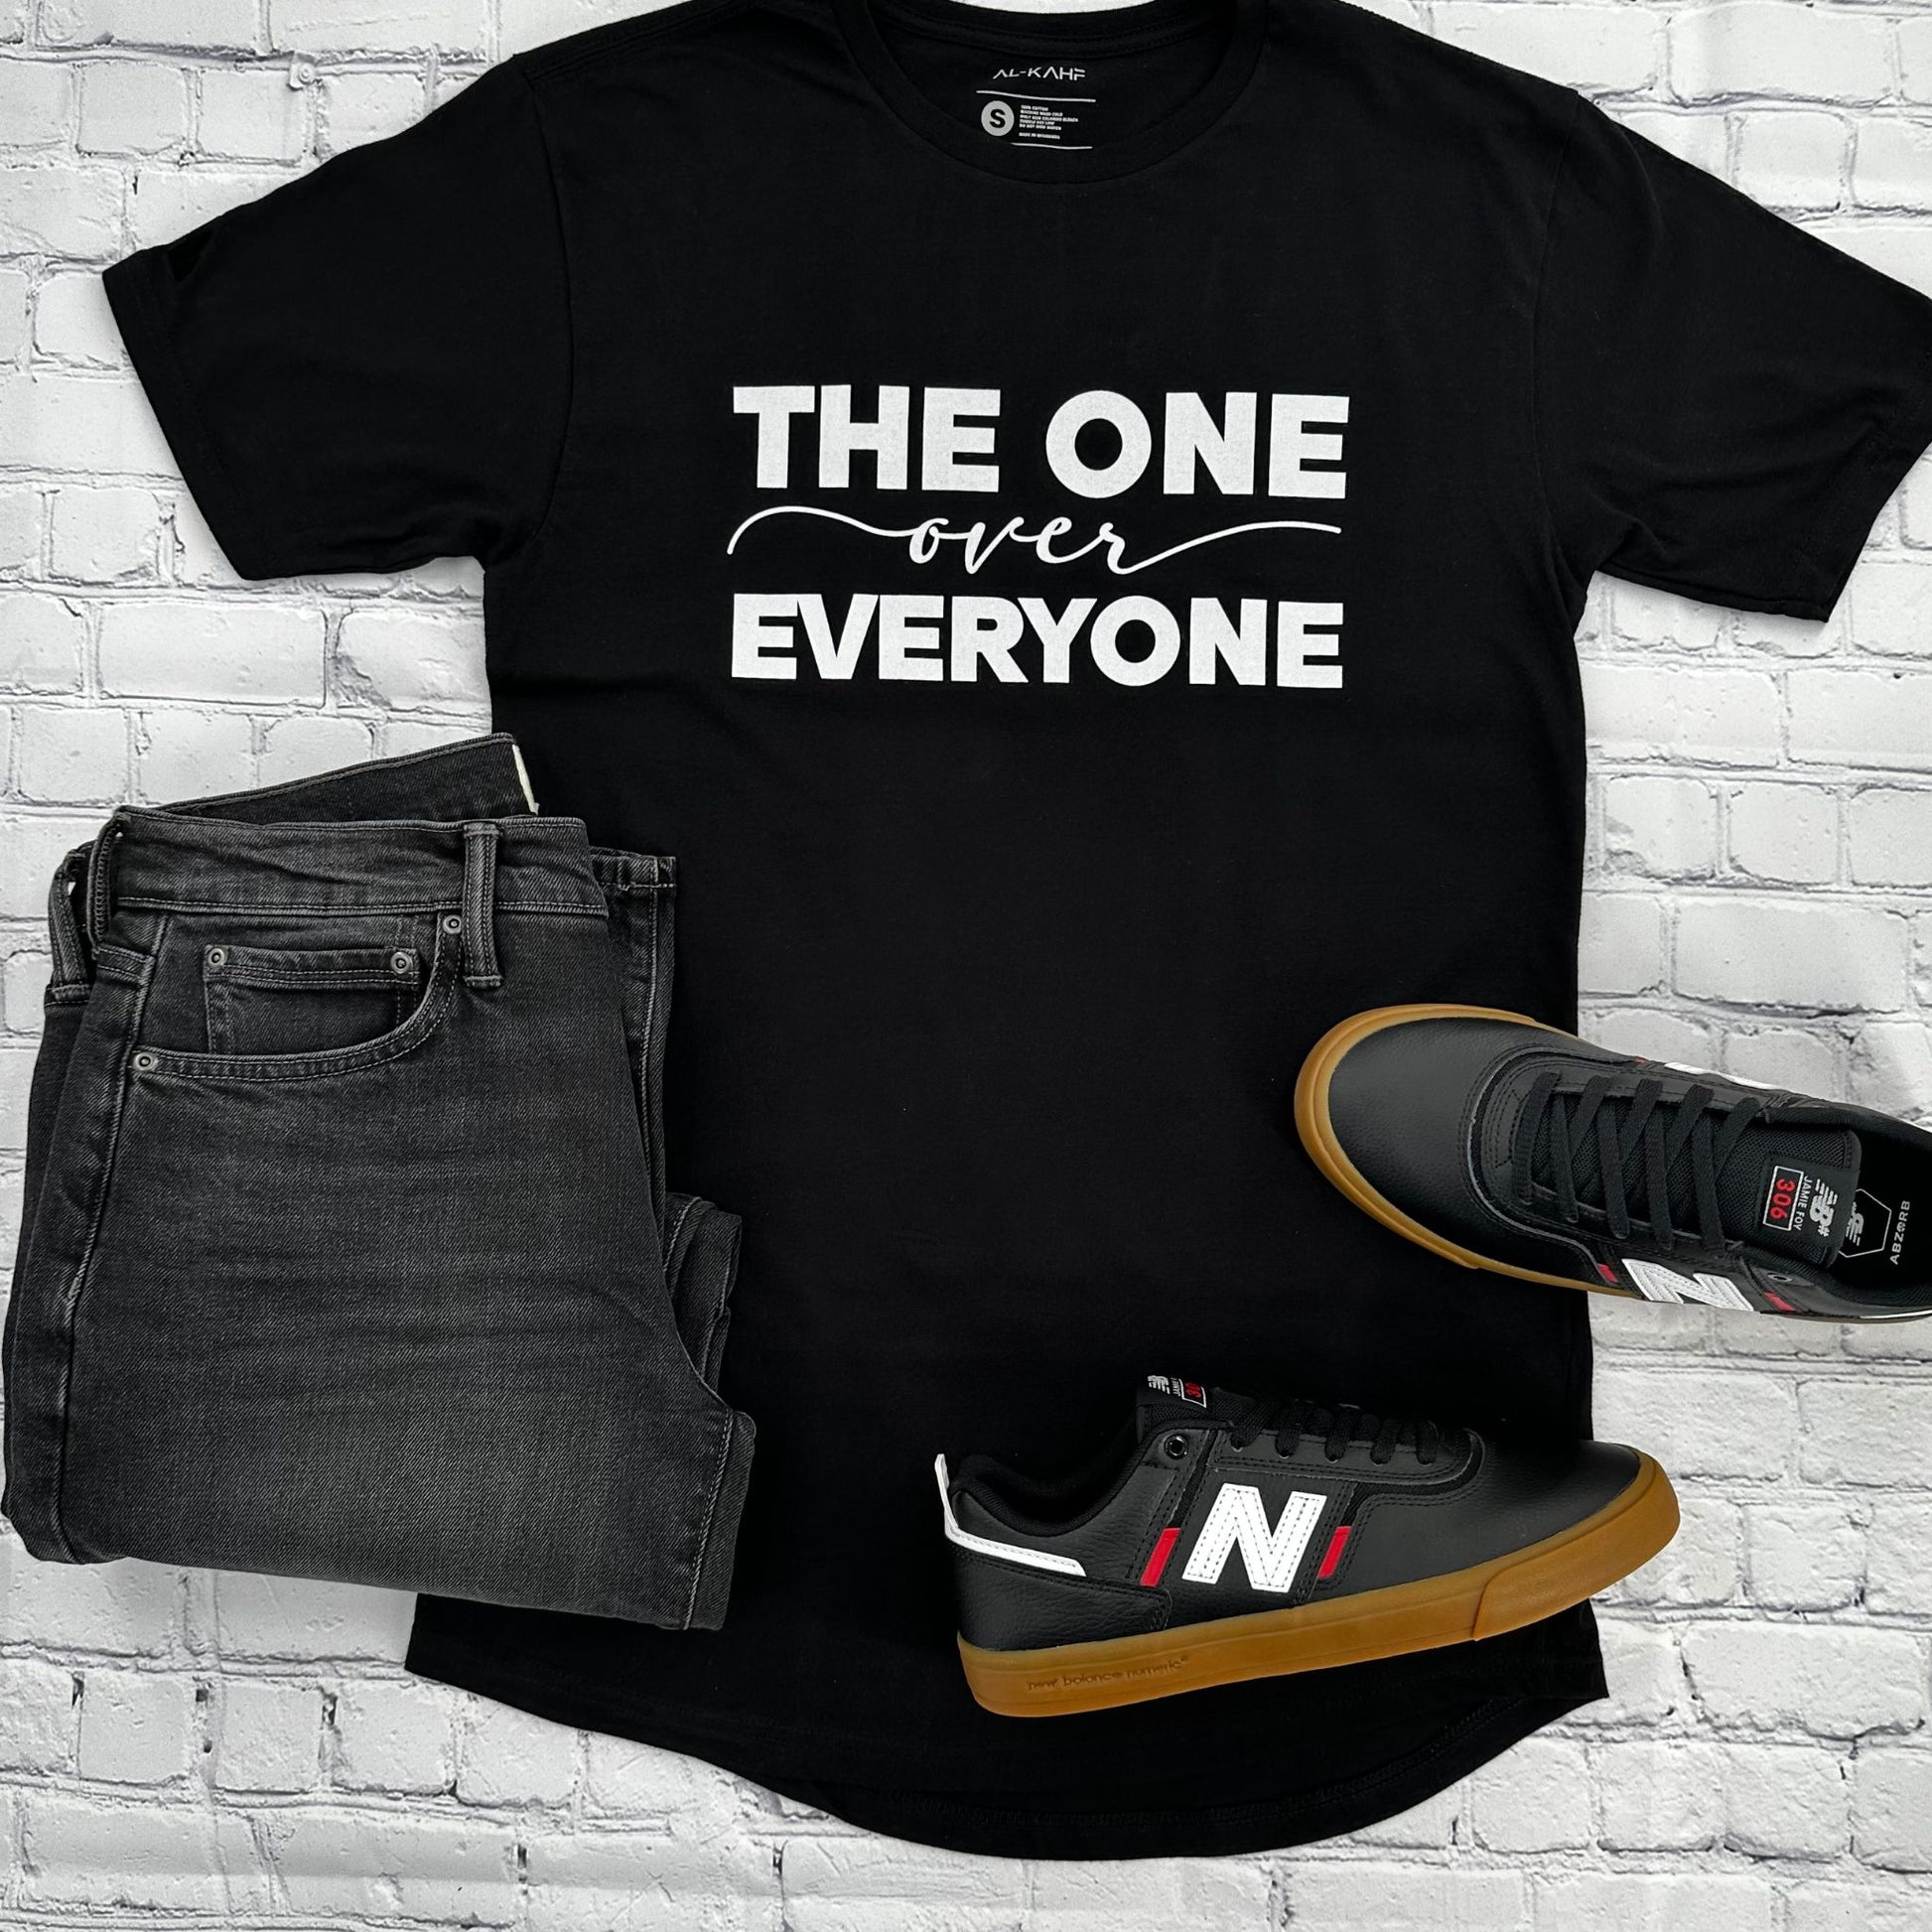 The black AHAD tee pictured alongside gray wash jeans and black New Balance sneakers